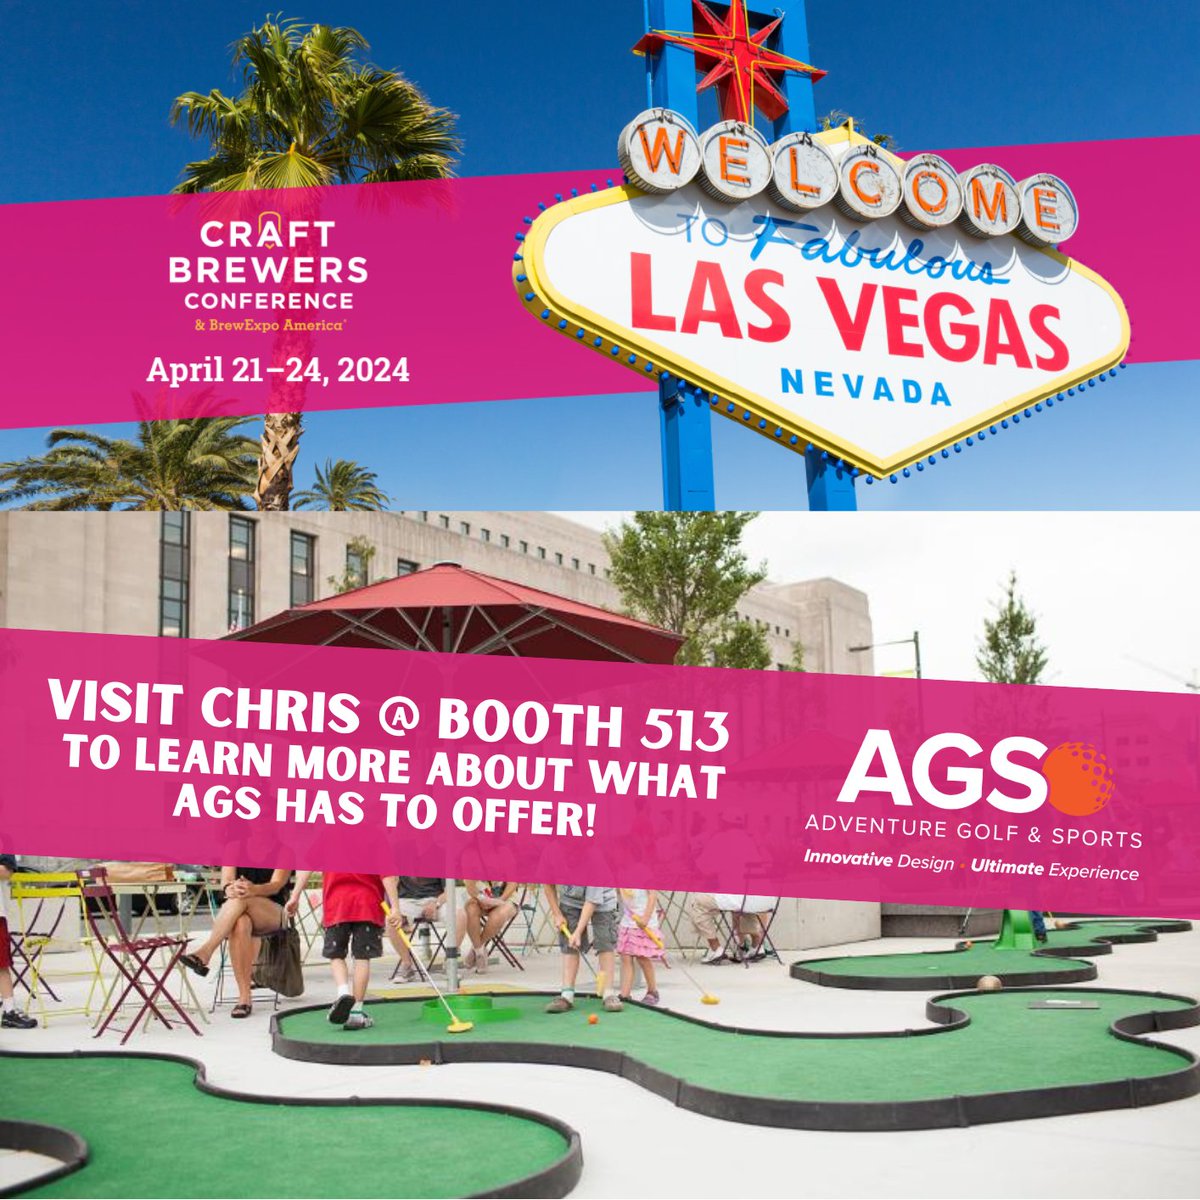 Join account executive, Chris Behler, in Las Vegas, Nevada from April 21-24 at the Craft Brewers Conference to discover why your business needs miniature golf! 🍻
#CBC24